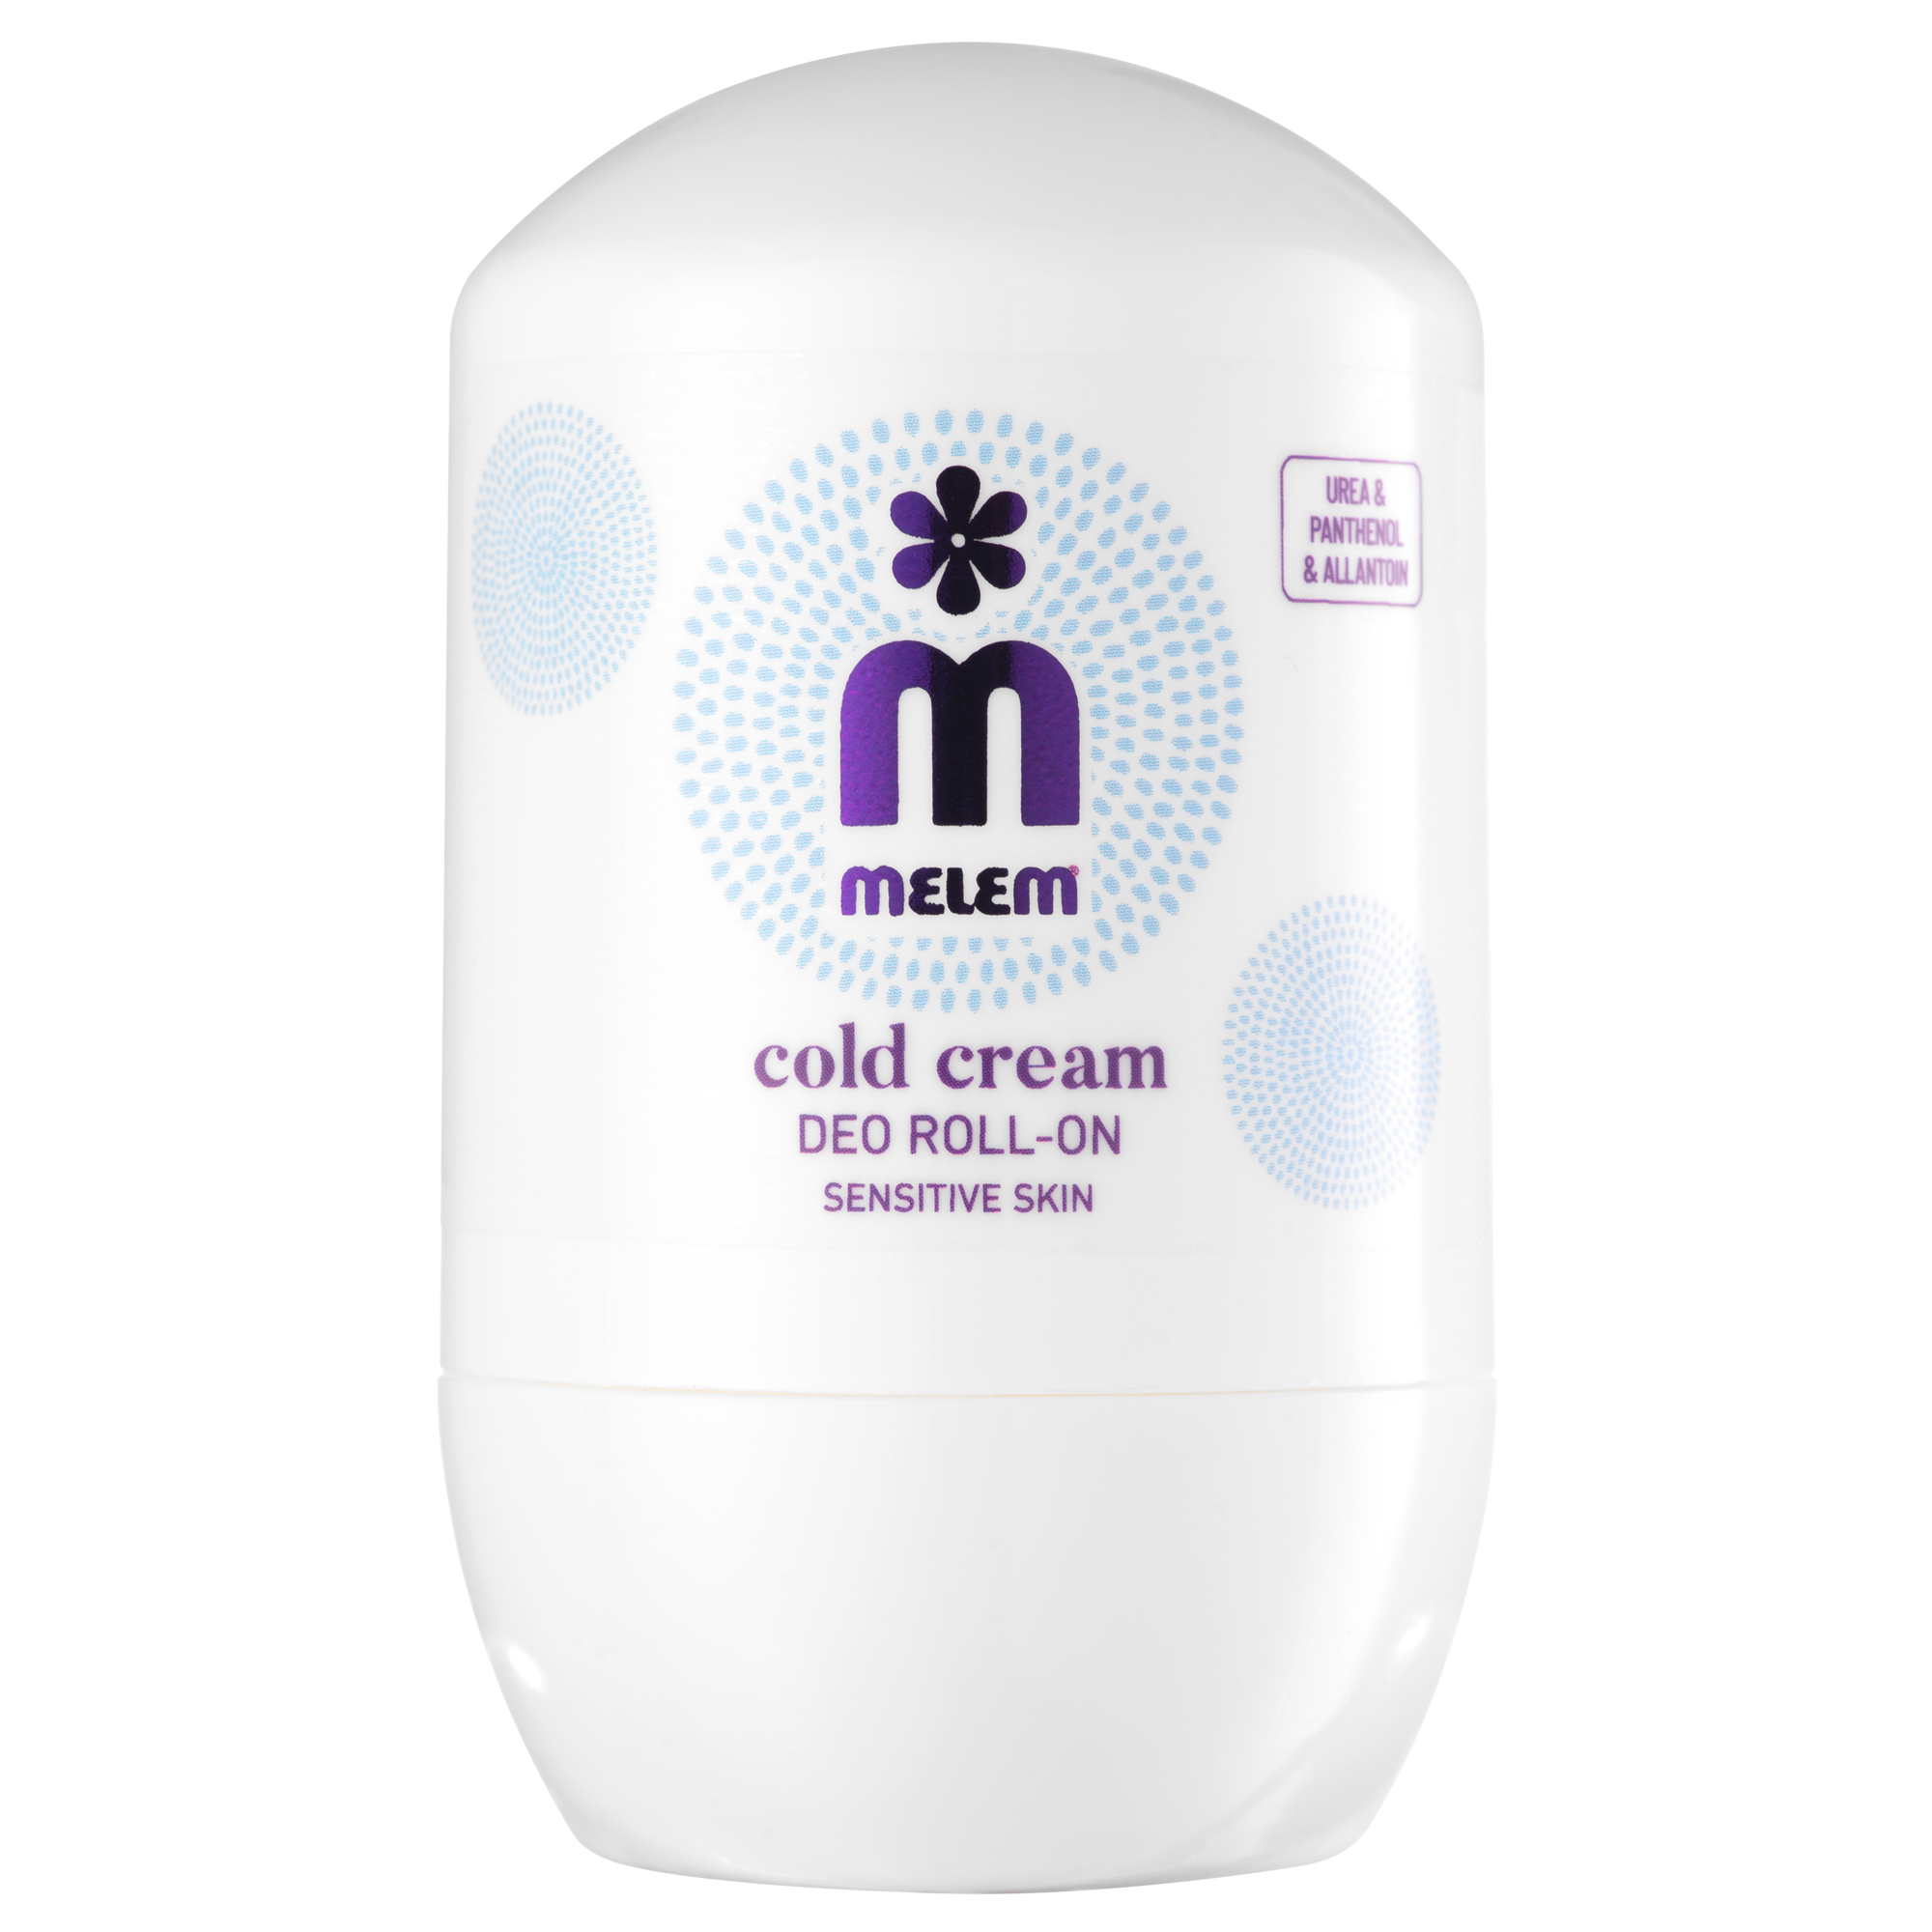 Melem Cold Cream deo roll-on 50ml